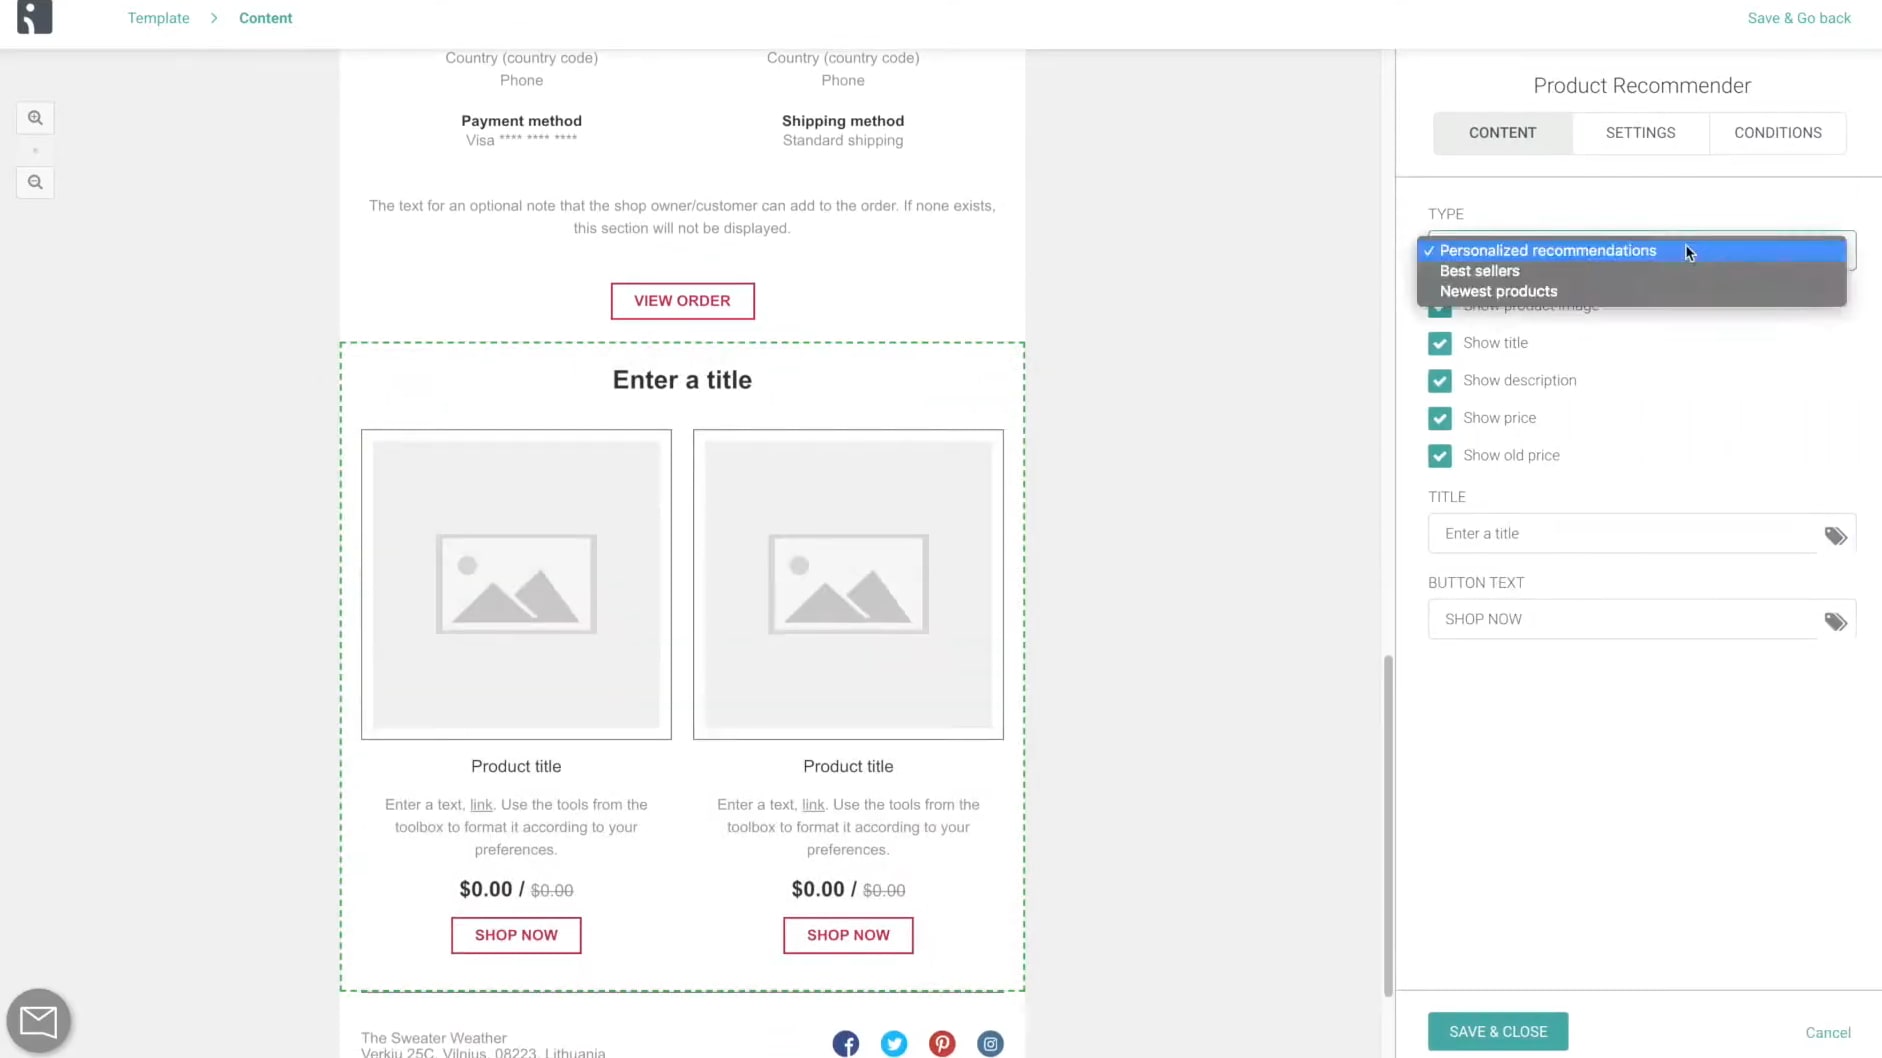 Omnisend Includes Product Recommendation Options to Predict Your Customers' Purchases